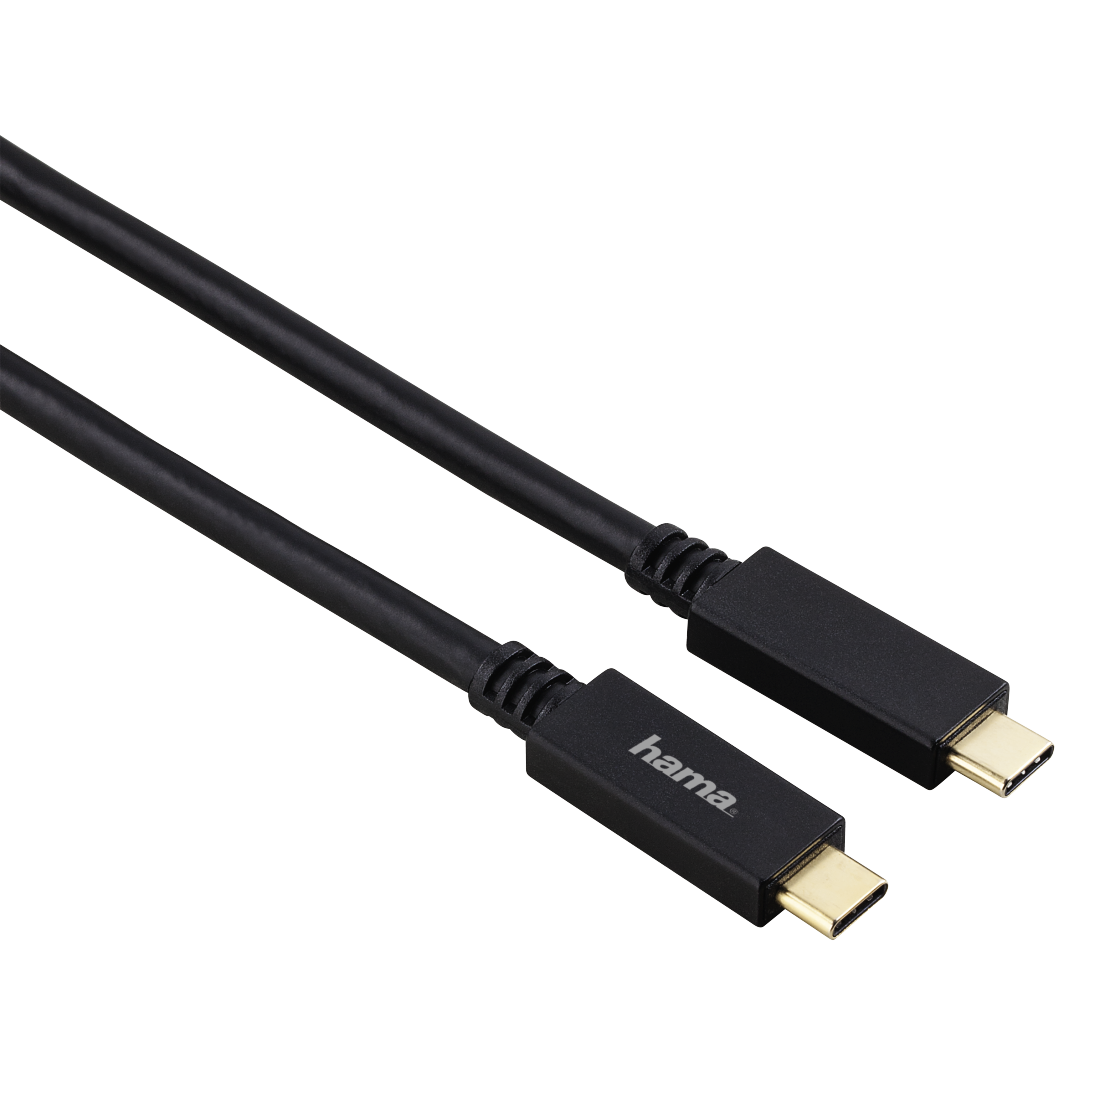 Hama USB-C Cable, USB 3.1 Gen 2, "Full-Featured", eMarker, 10 Gbit/s, 5A,  1.00 m